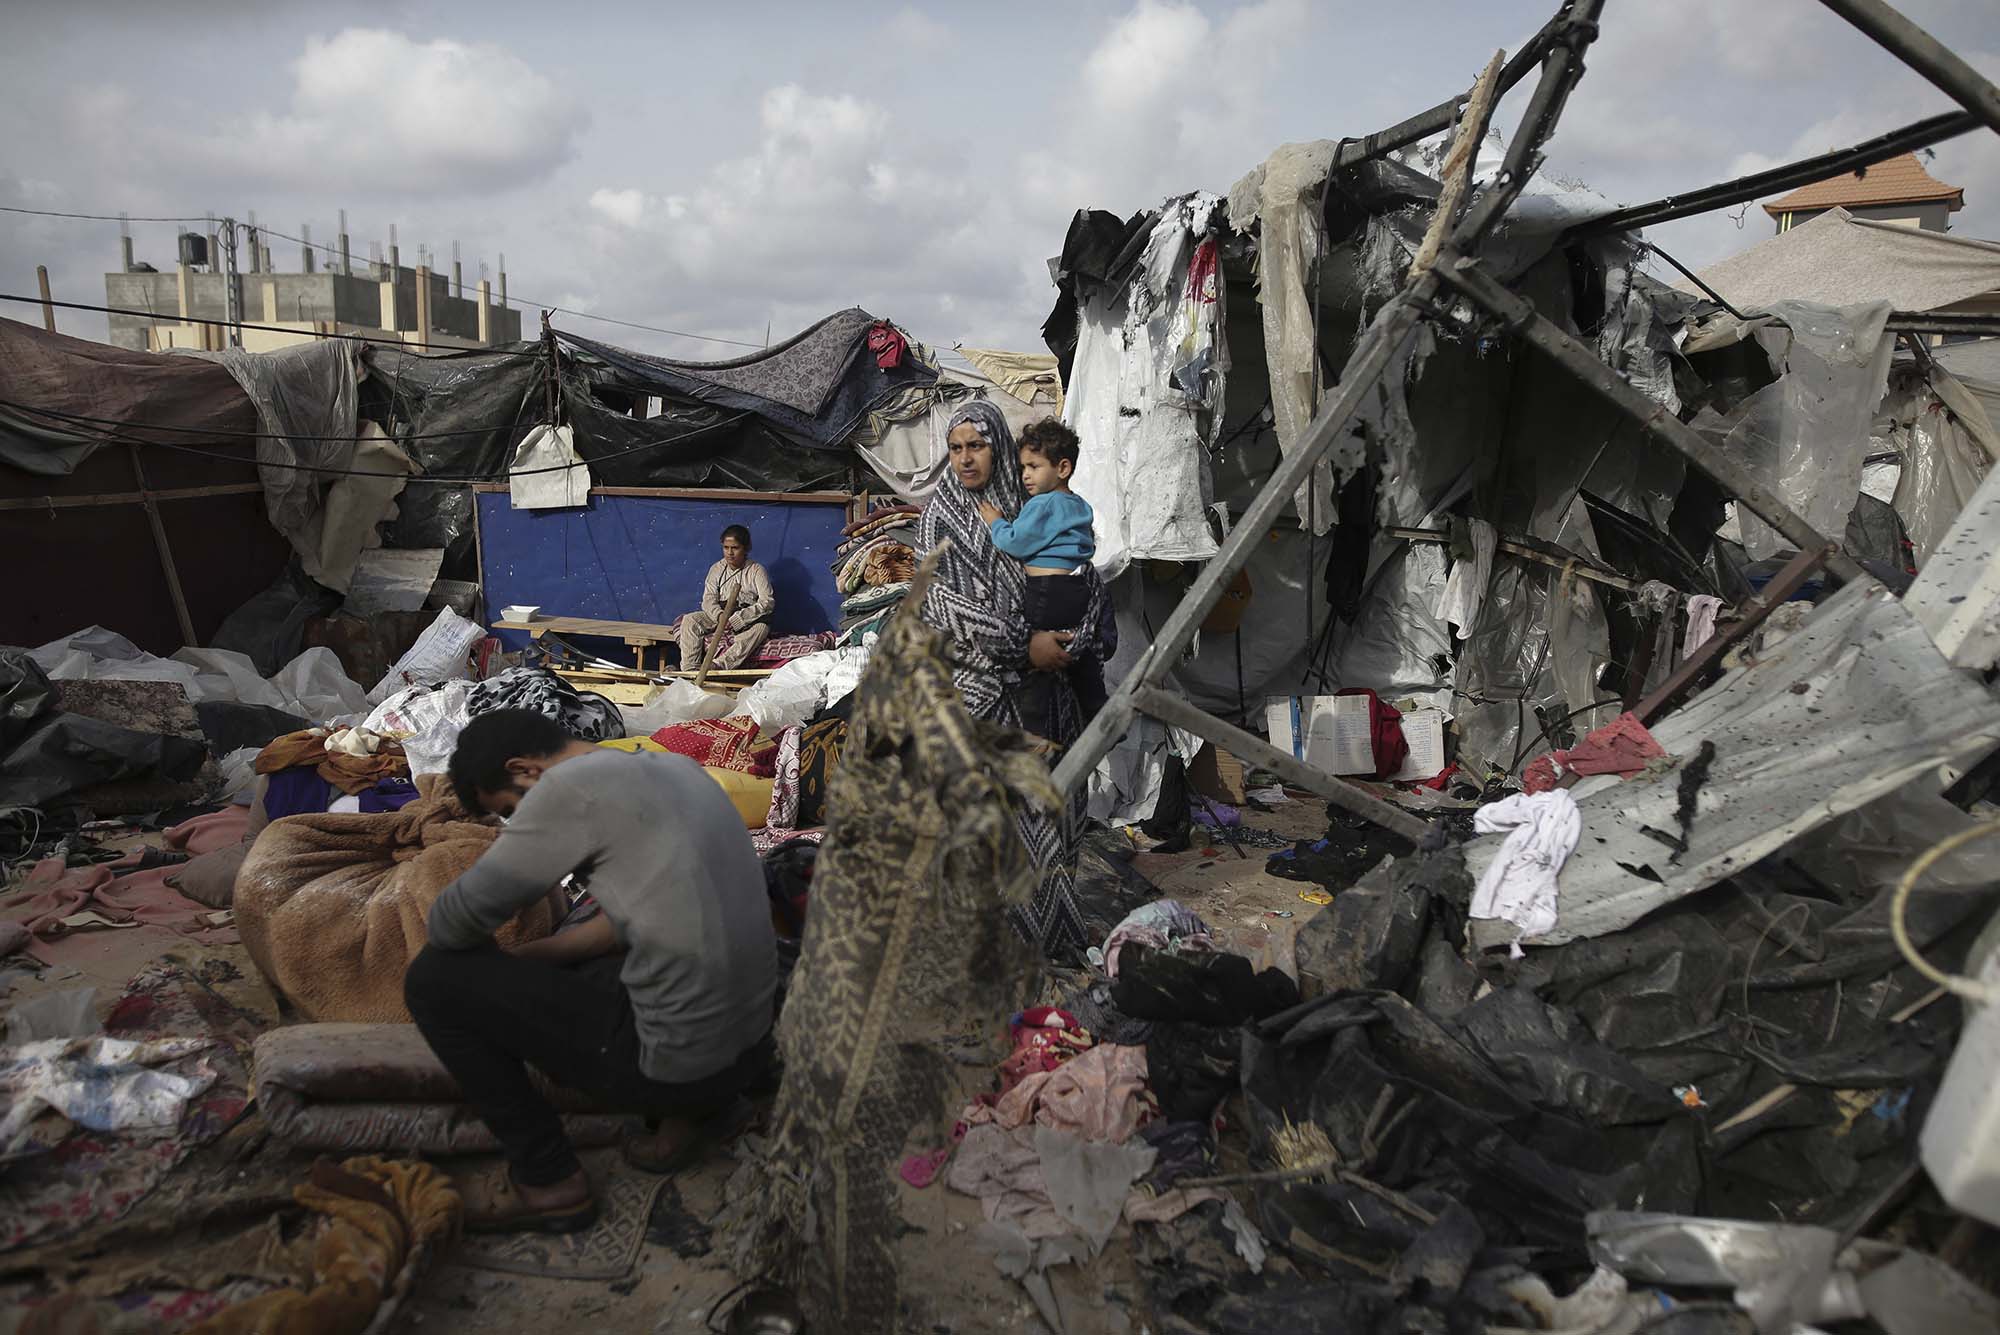 Photo: Displaced Palestinians inspect their tents destroyed by Israel's bombardment, adjunct to an UNRWA facility west of Rafah city, Gaza Strip. Amongst the destruction, a mom holds her child in her hands, surveying the damage.